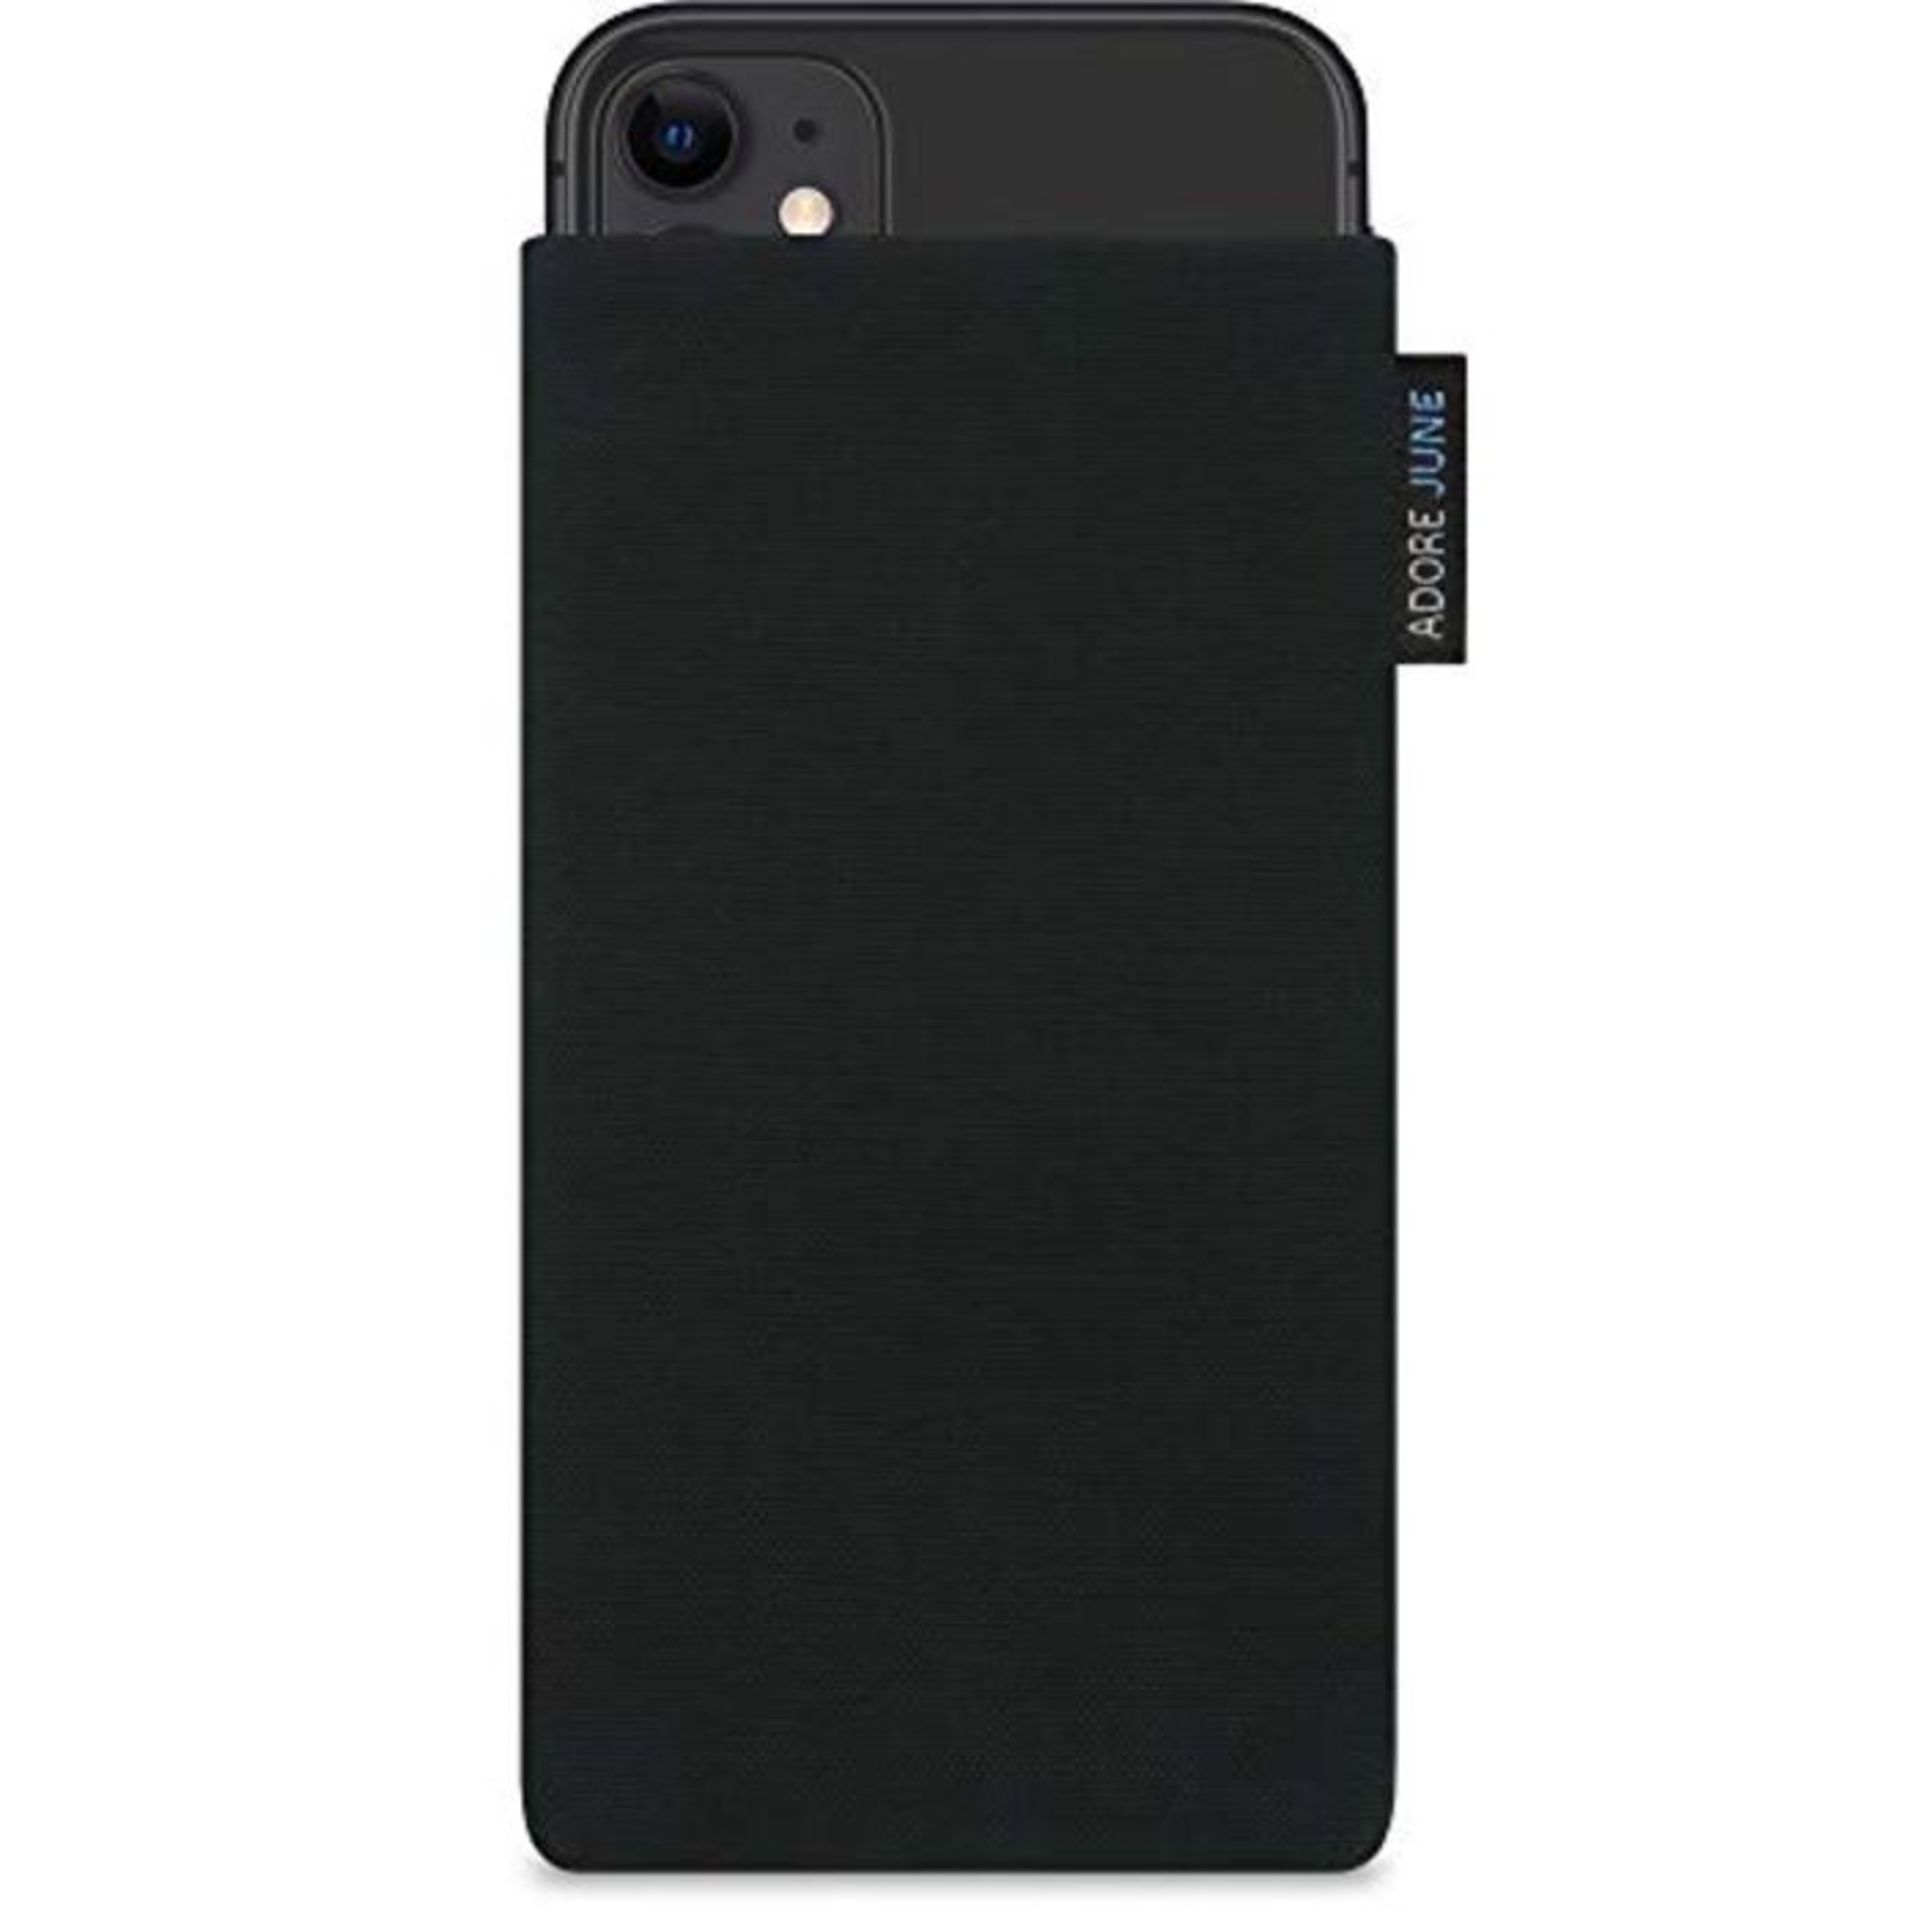 Adore June Classic Black Protection Sleeve compatible with Apple iPhone 11, Pouch Case - Image 3 of 4